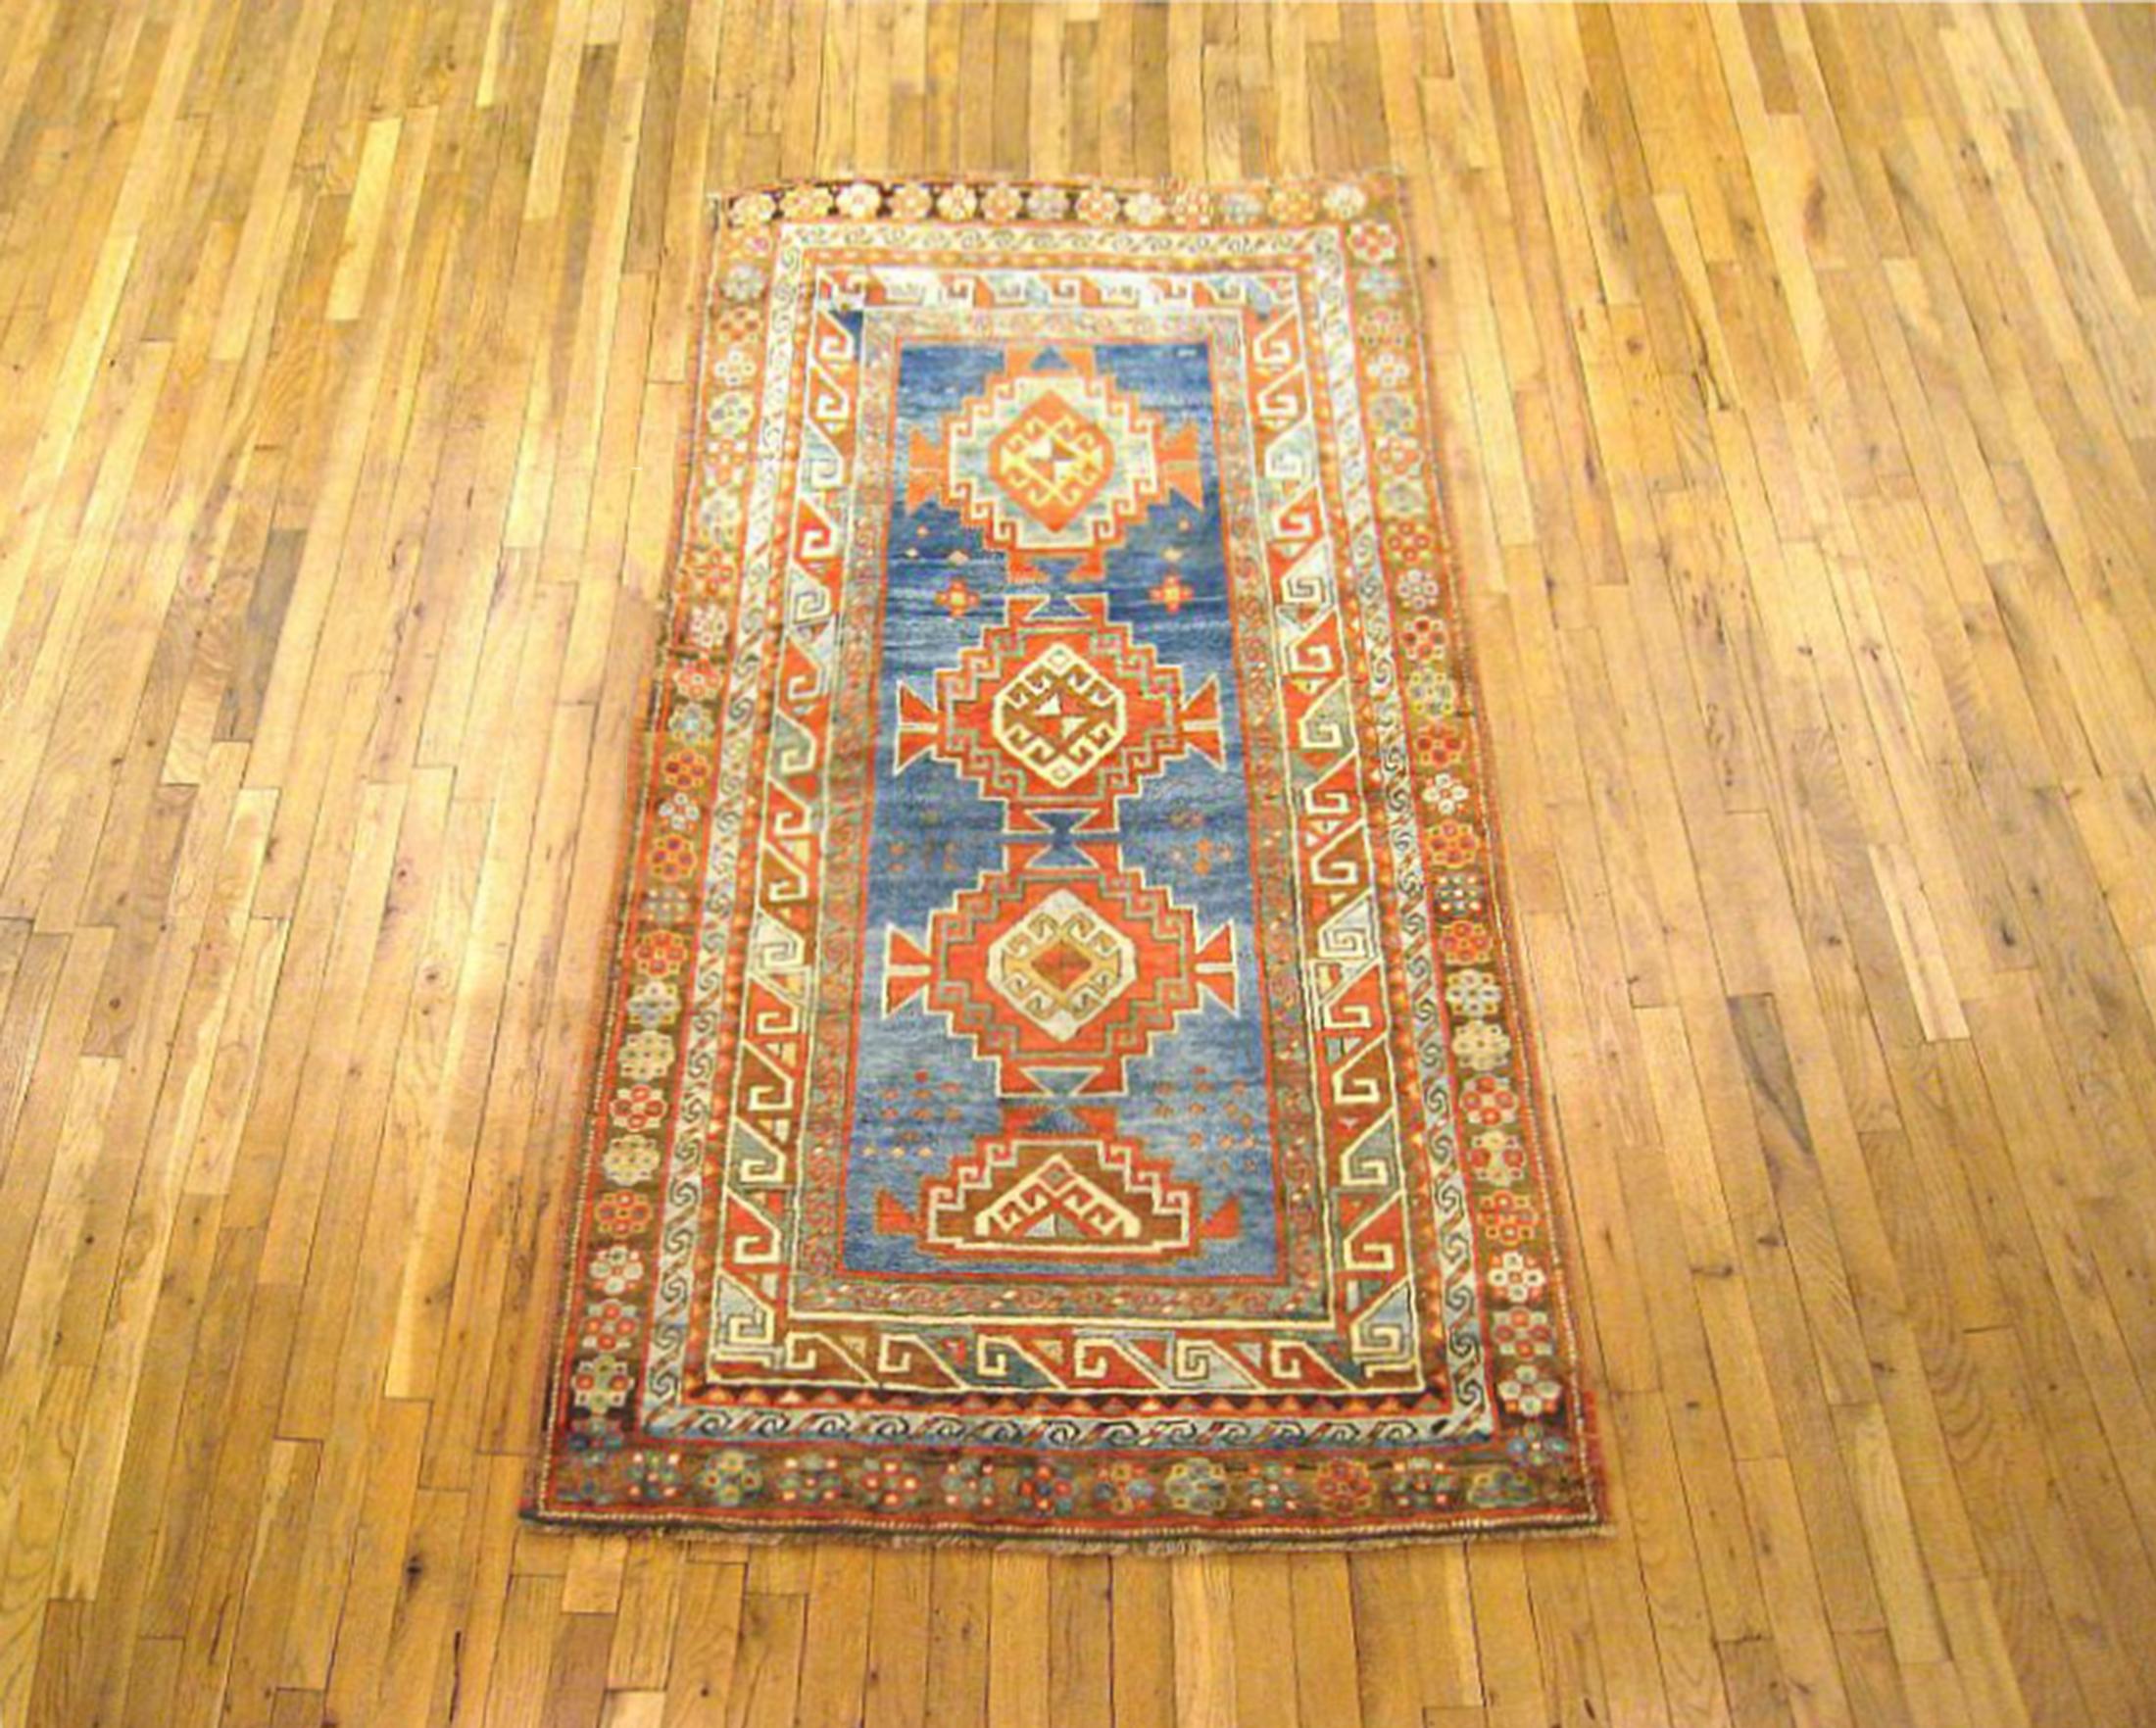 Antique Caucasian Kazak Oriental Carpet, Runner size, circa 1920

A one-of-a-kind antique Caucasian Kazak Oriental Carpet, hand-knotted with soft wool pile. This lovely hand-knotted wool rug features multiple medallions with geometric abstracts on